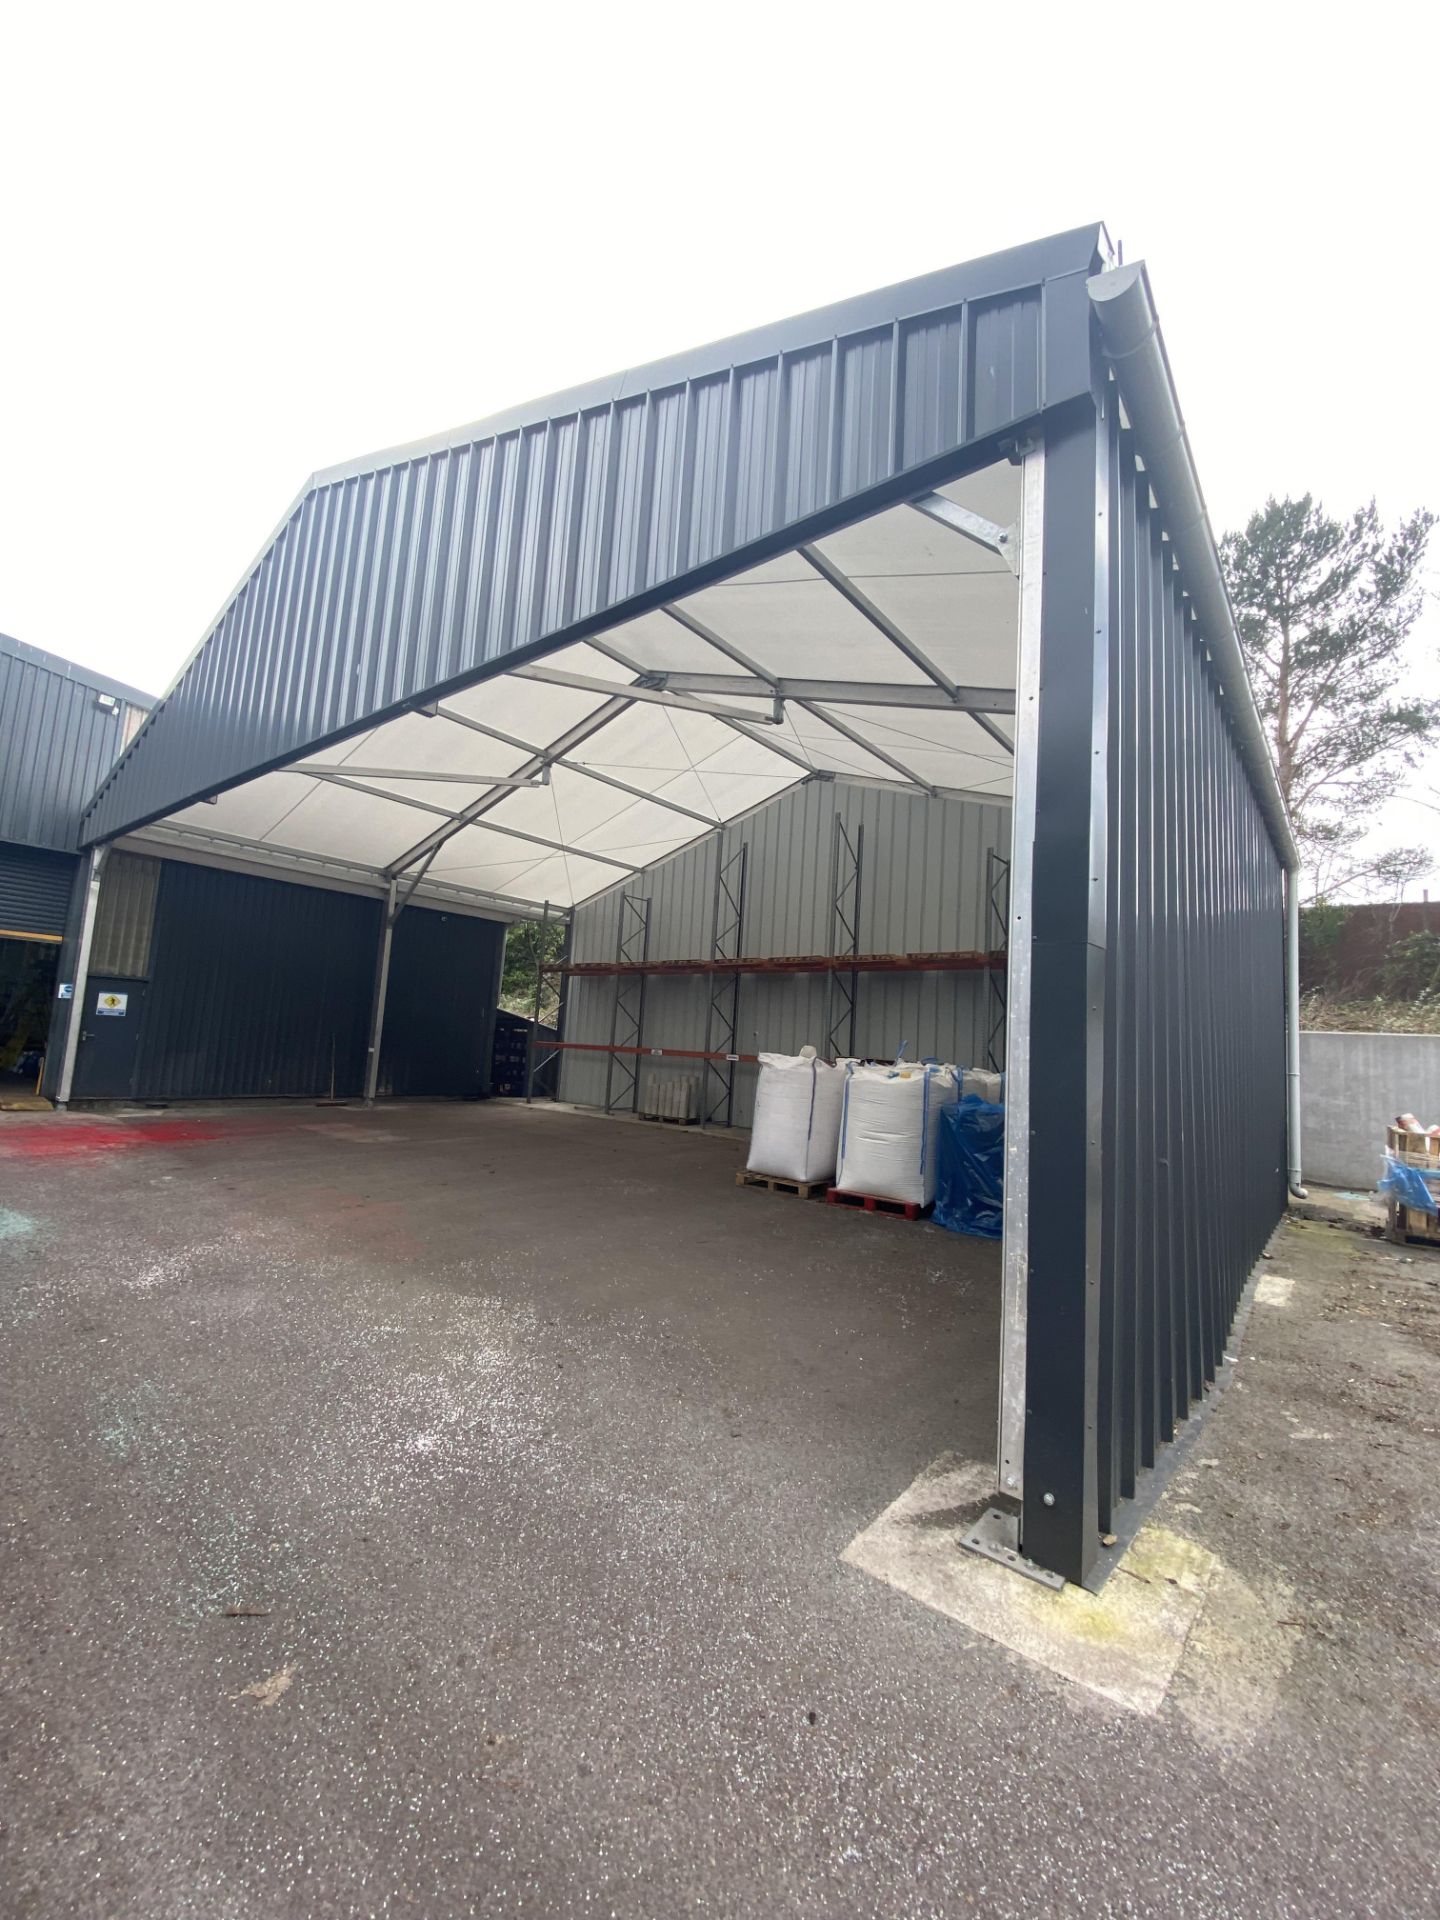 ALLOY PORTAL FRAMED TEMPORARY INDUSTRIAL BUILDING, approx. 14.7m x 9.8m x 4.8m high (eaves), 7.3m to - Image 4 of 9